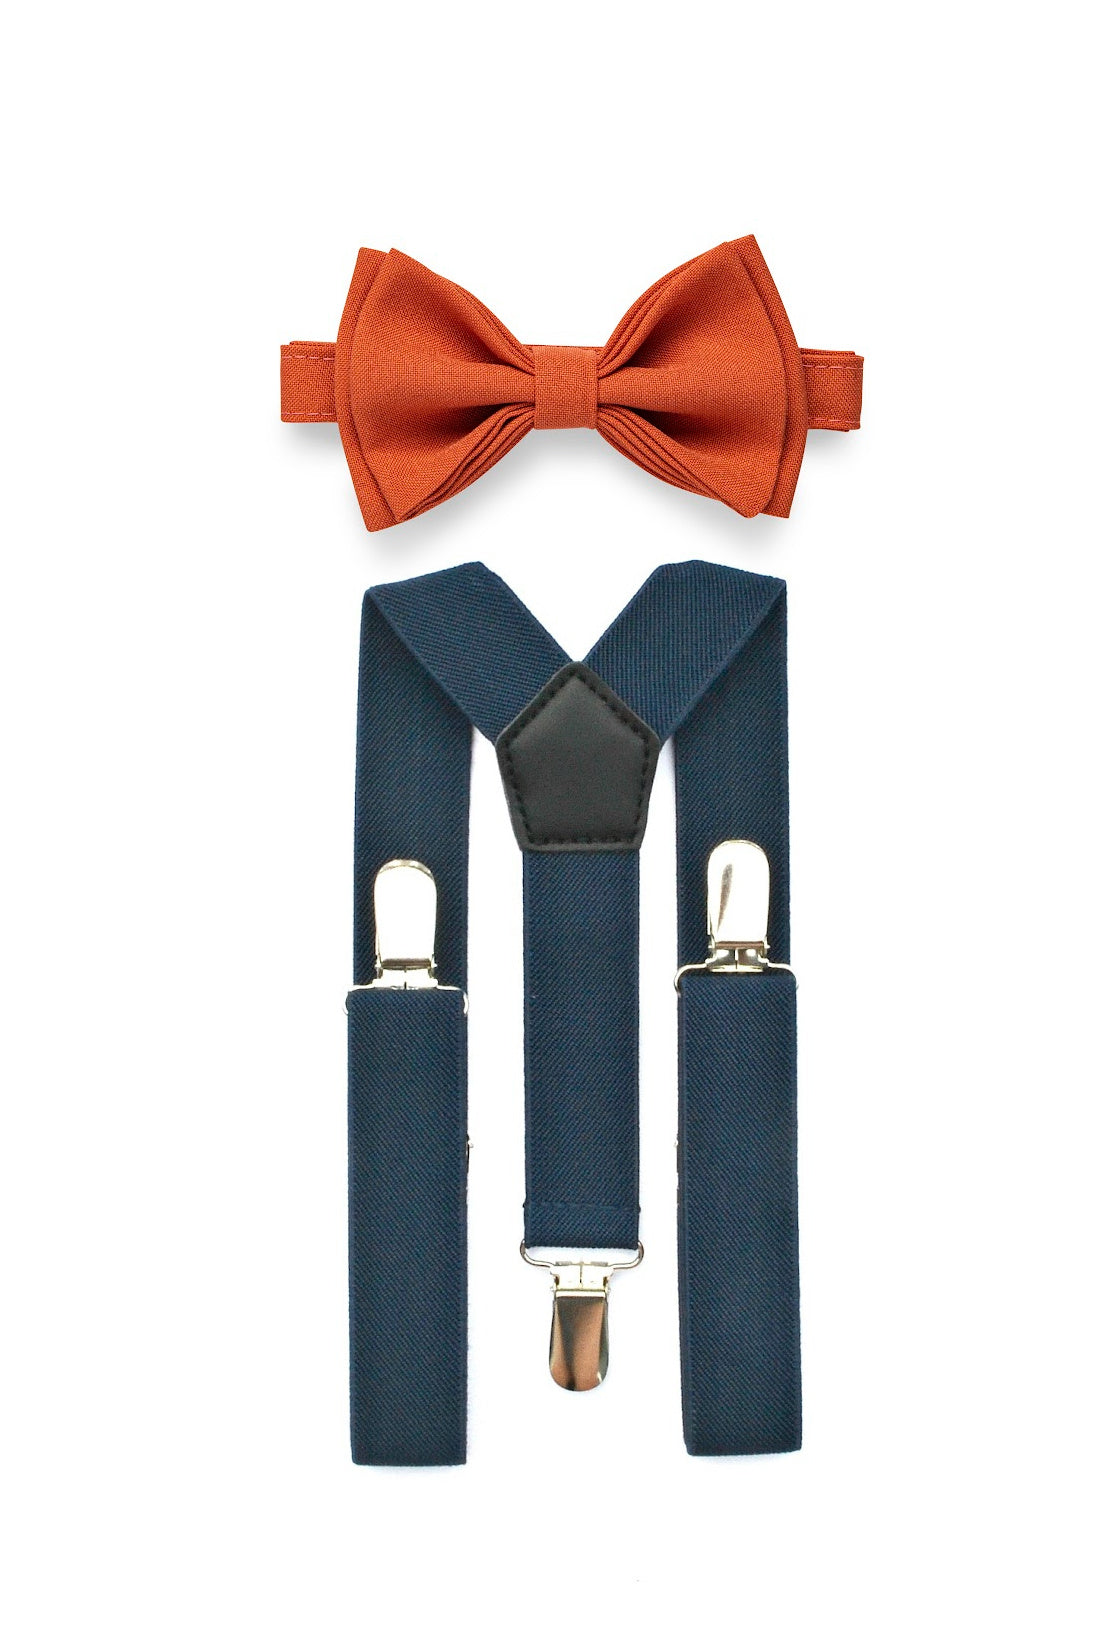 Red Suspenders & Red Bow Tie - Baby to Adult Sizes– Armoniia